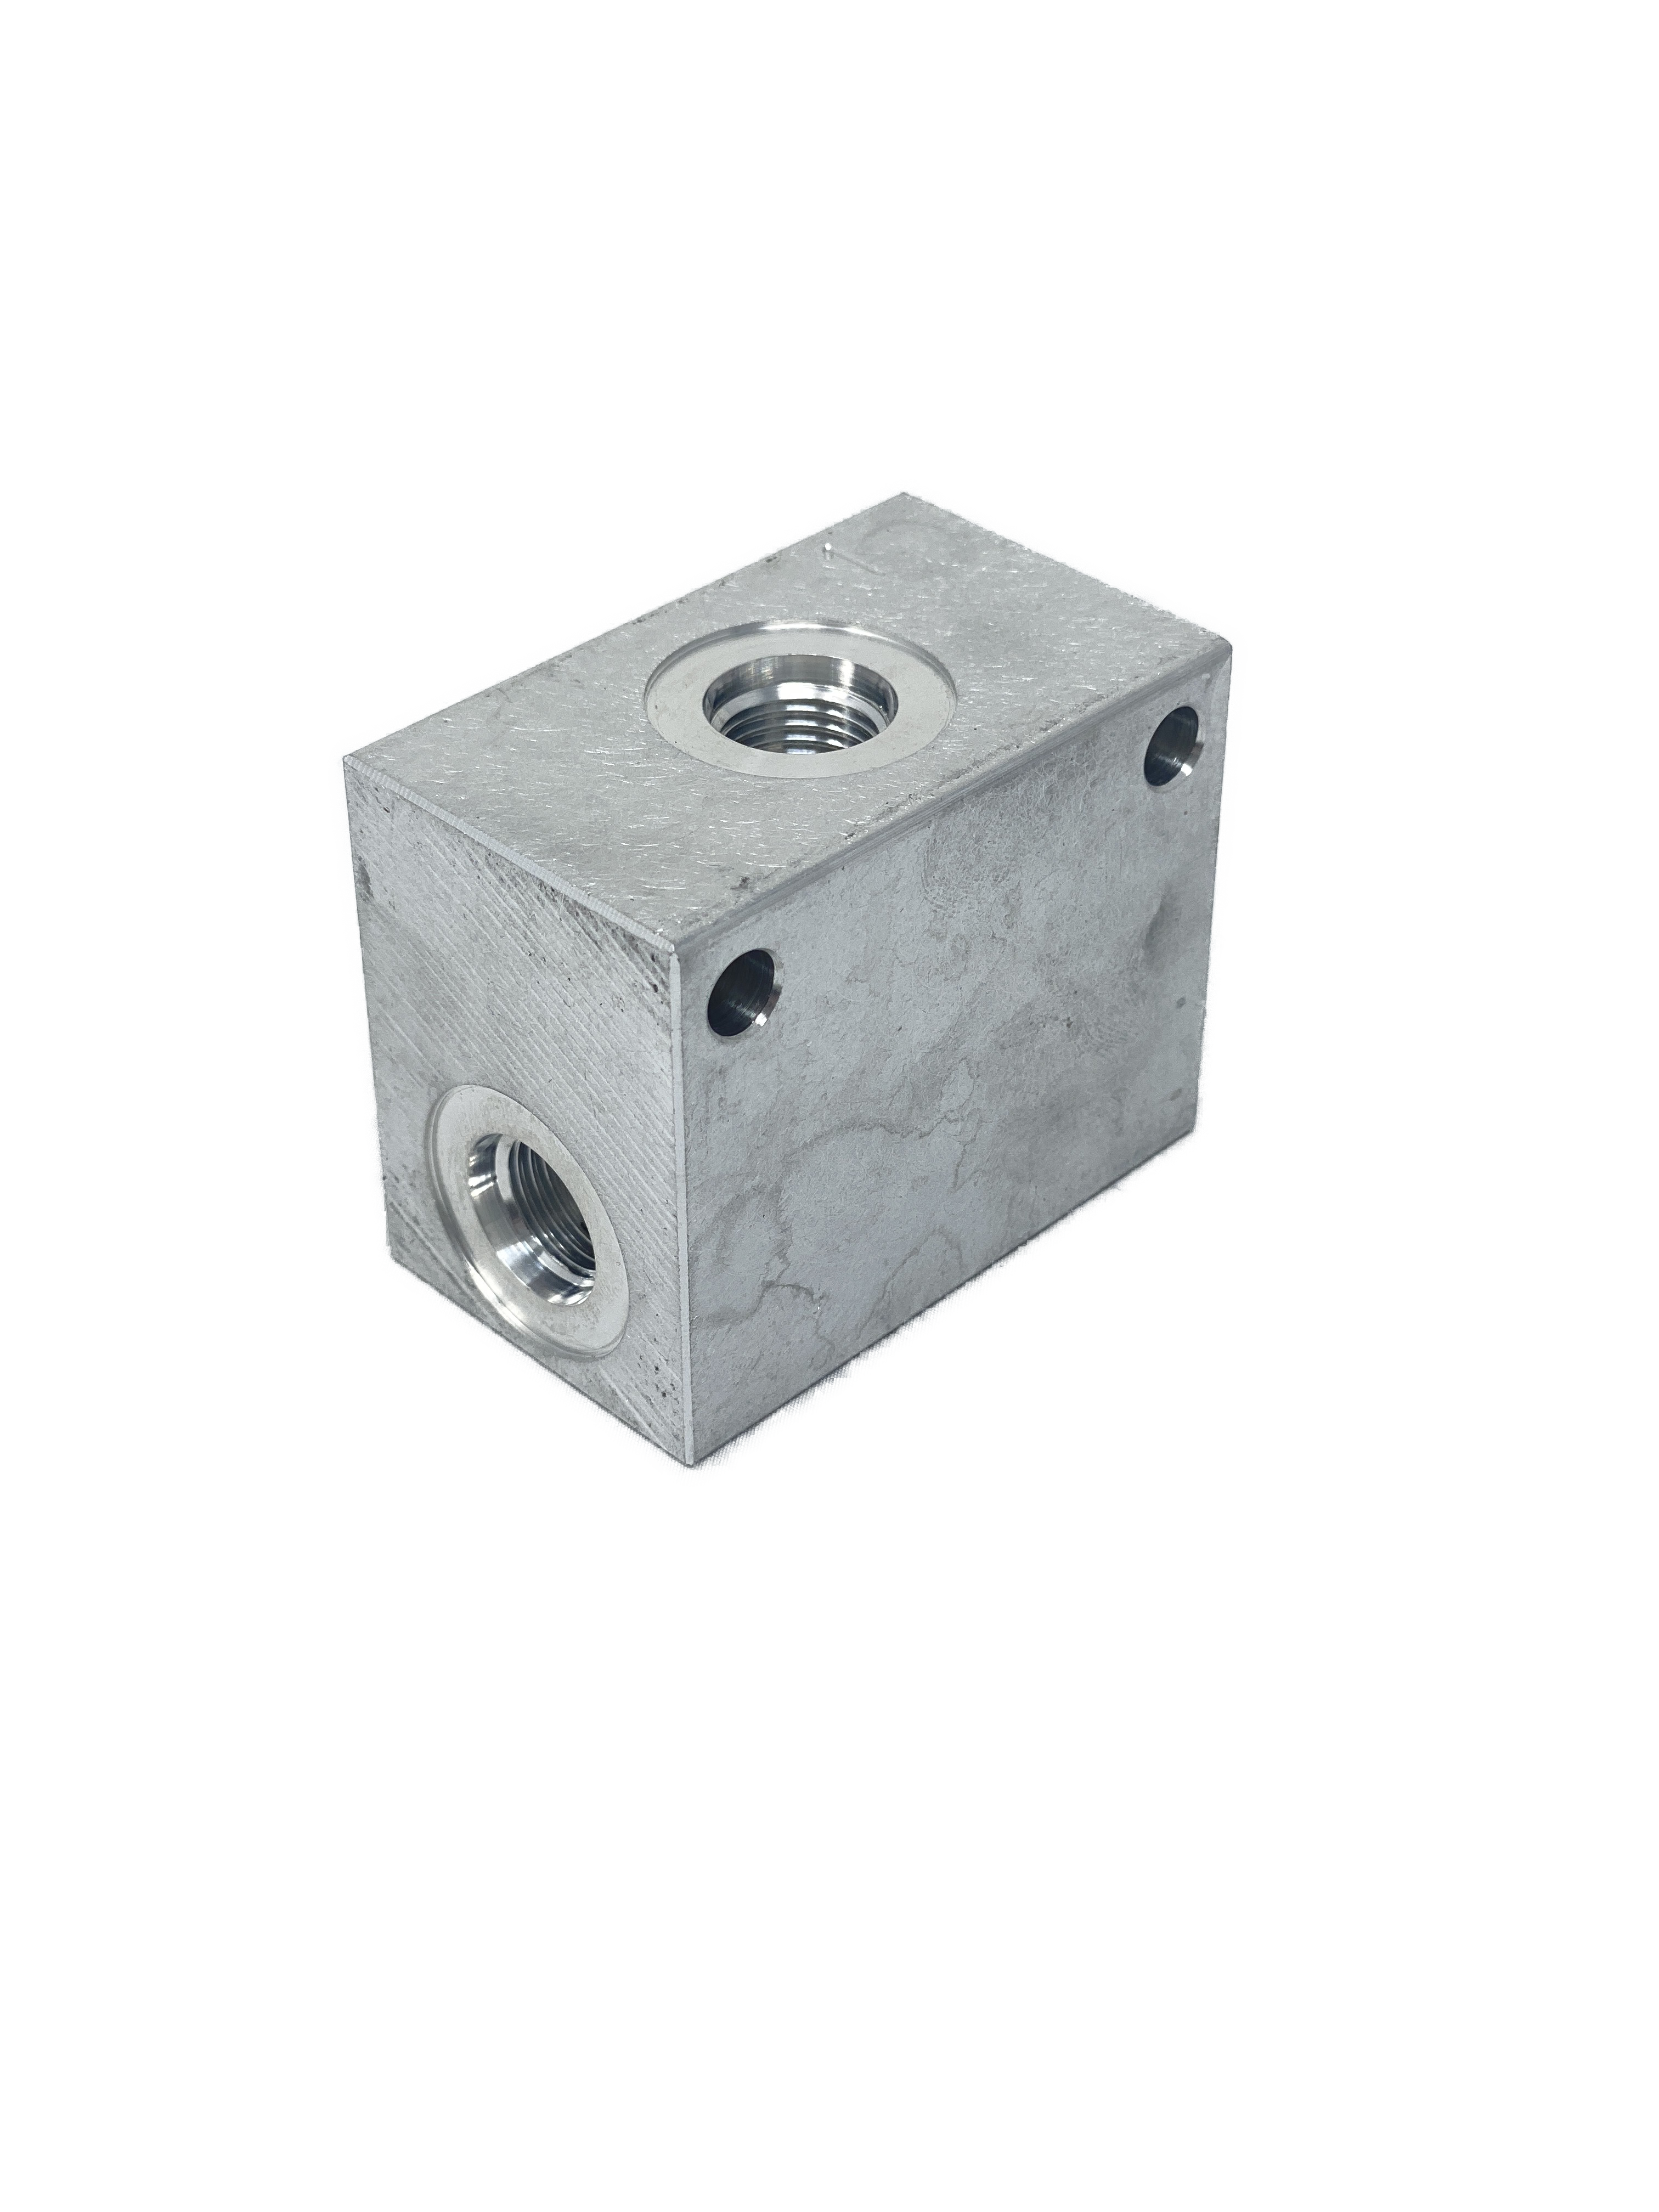 AC102CB6S : Daman Common Cavity Body, C-10-2 Cartridge Cavity, #6 SAE (3/8") Port Connections, 3000psi Rated, Aluminum, Without Gauge Port